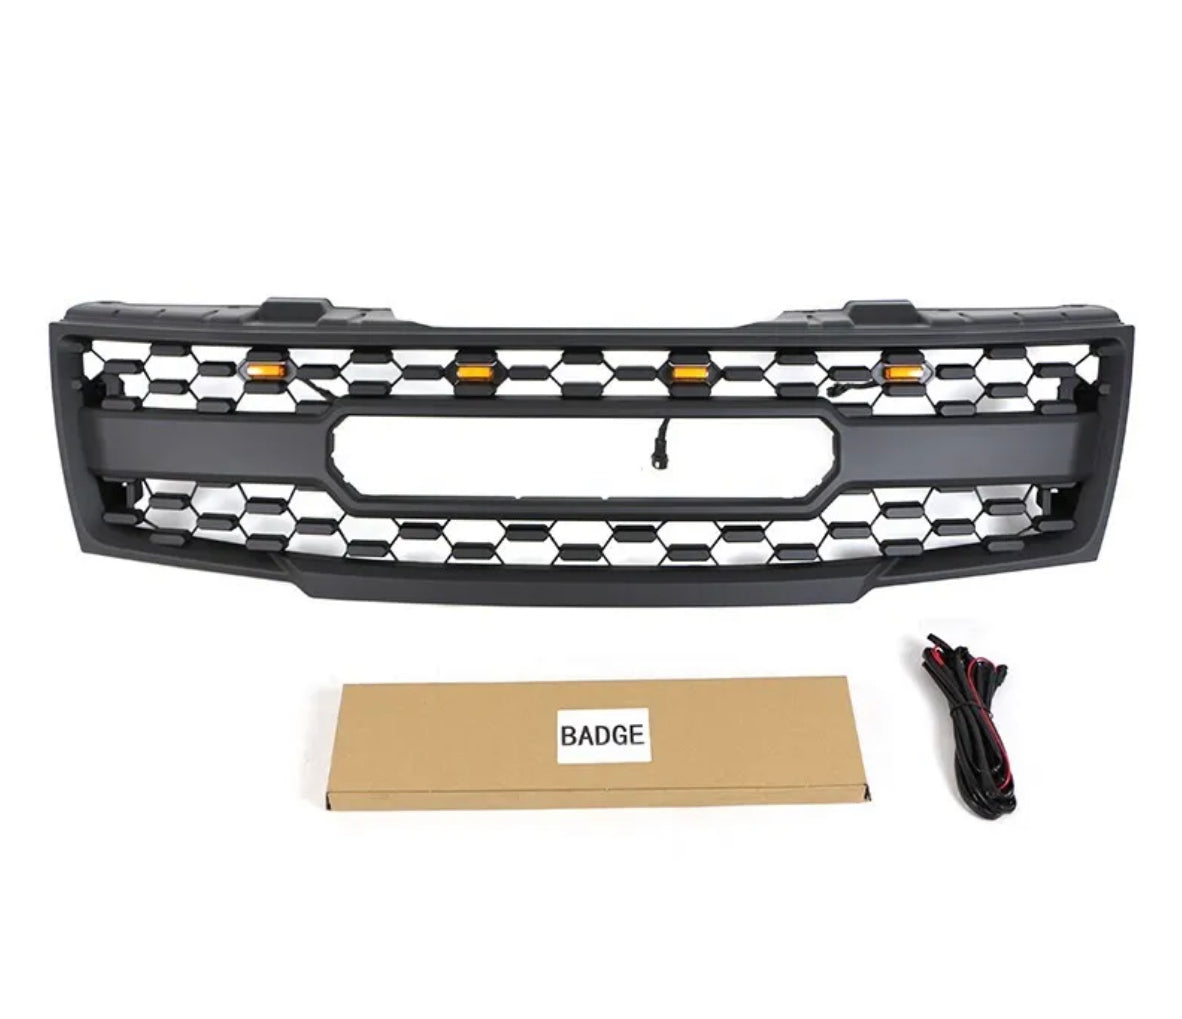 Black Front Upper Grille Fits For Nissan Frontier 2009-2019 With LED Light & Nissan Letters